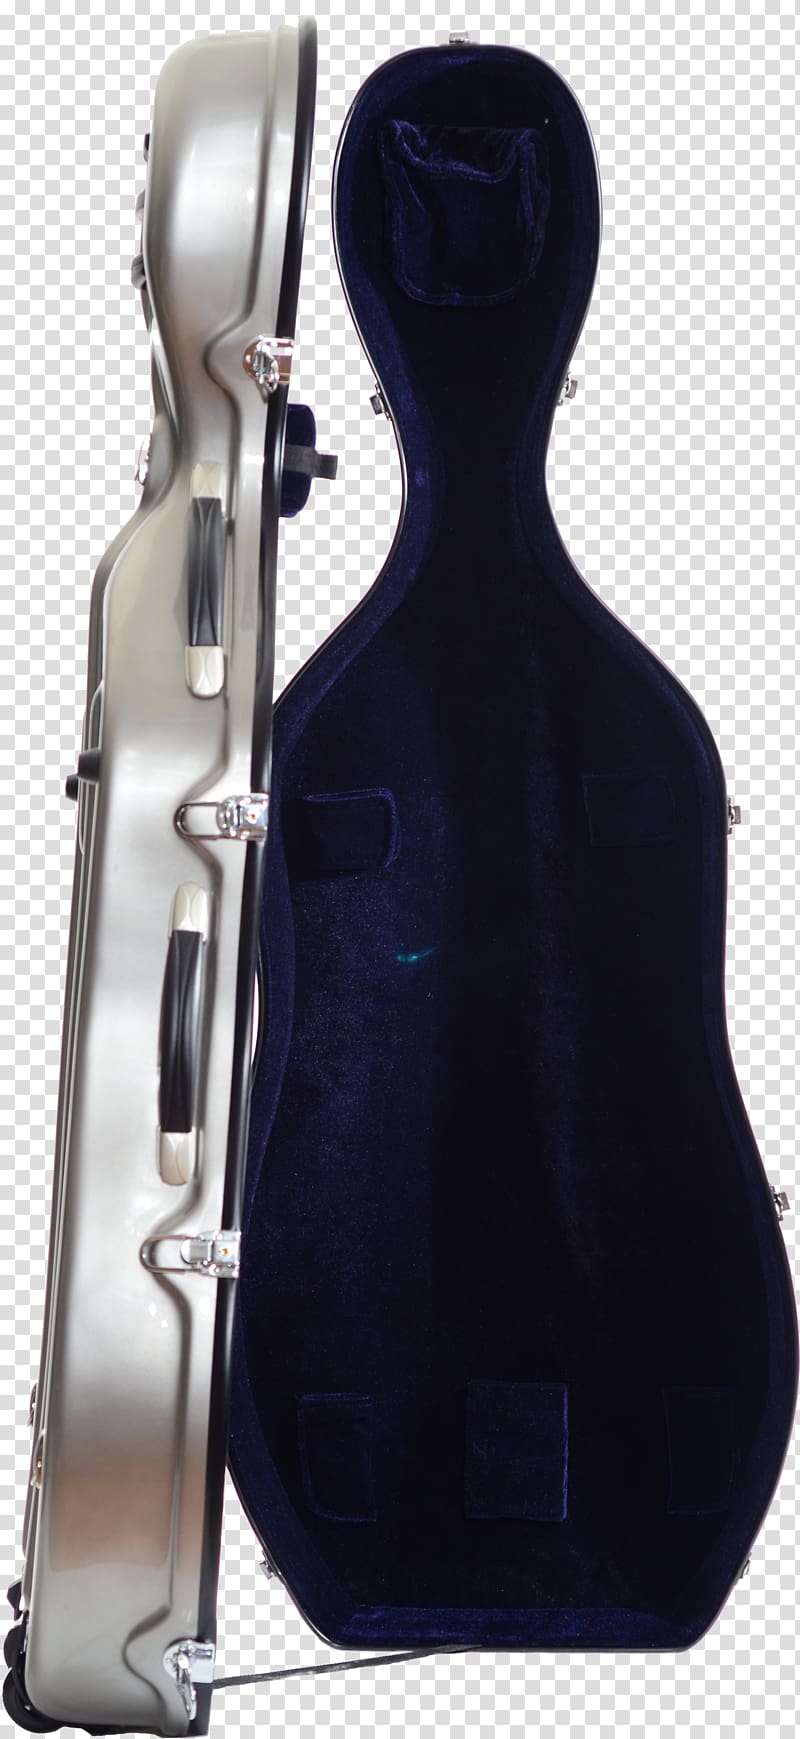 Cello Double bass Violin Tololoche Product, violin transparent background PNG clipart